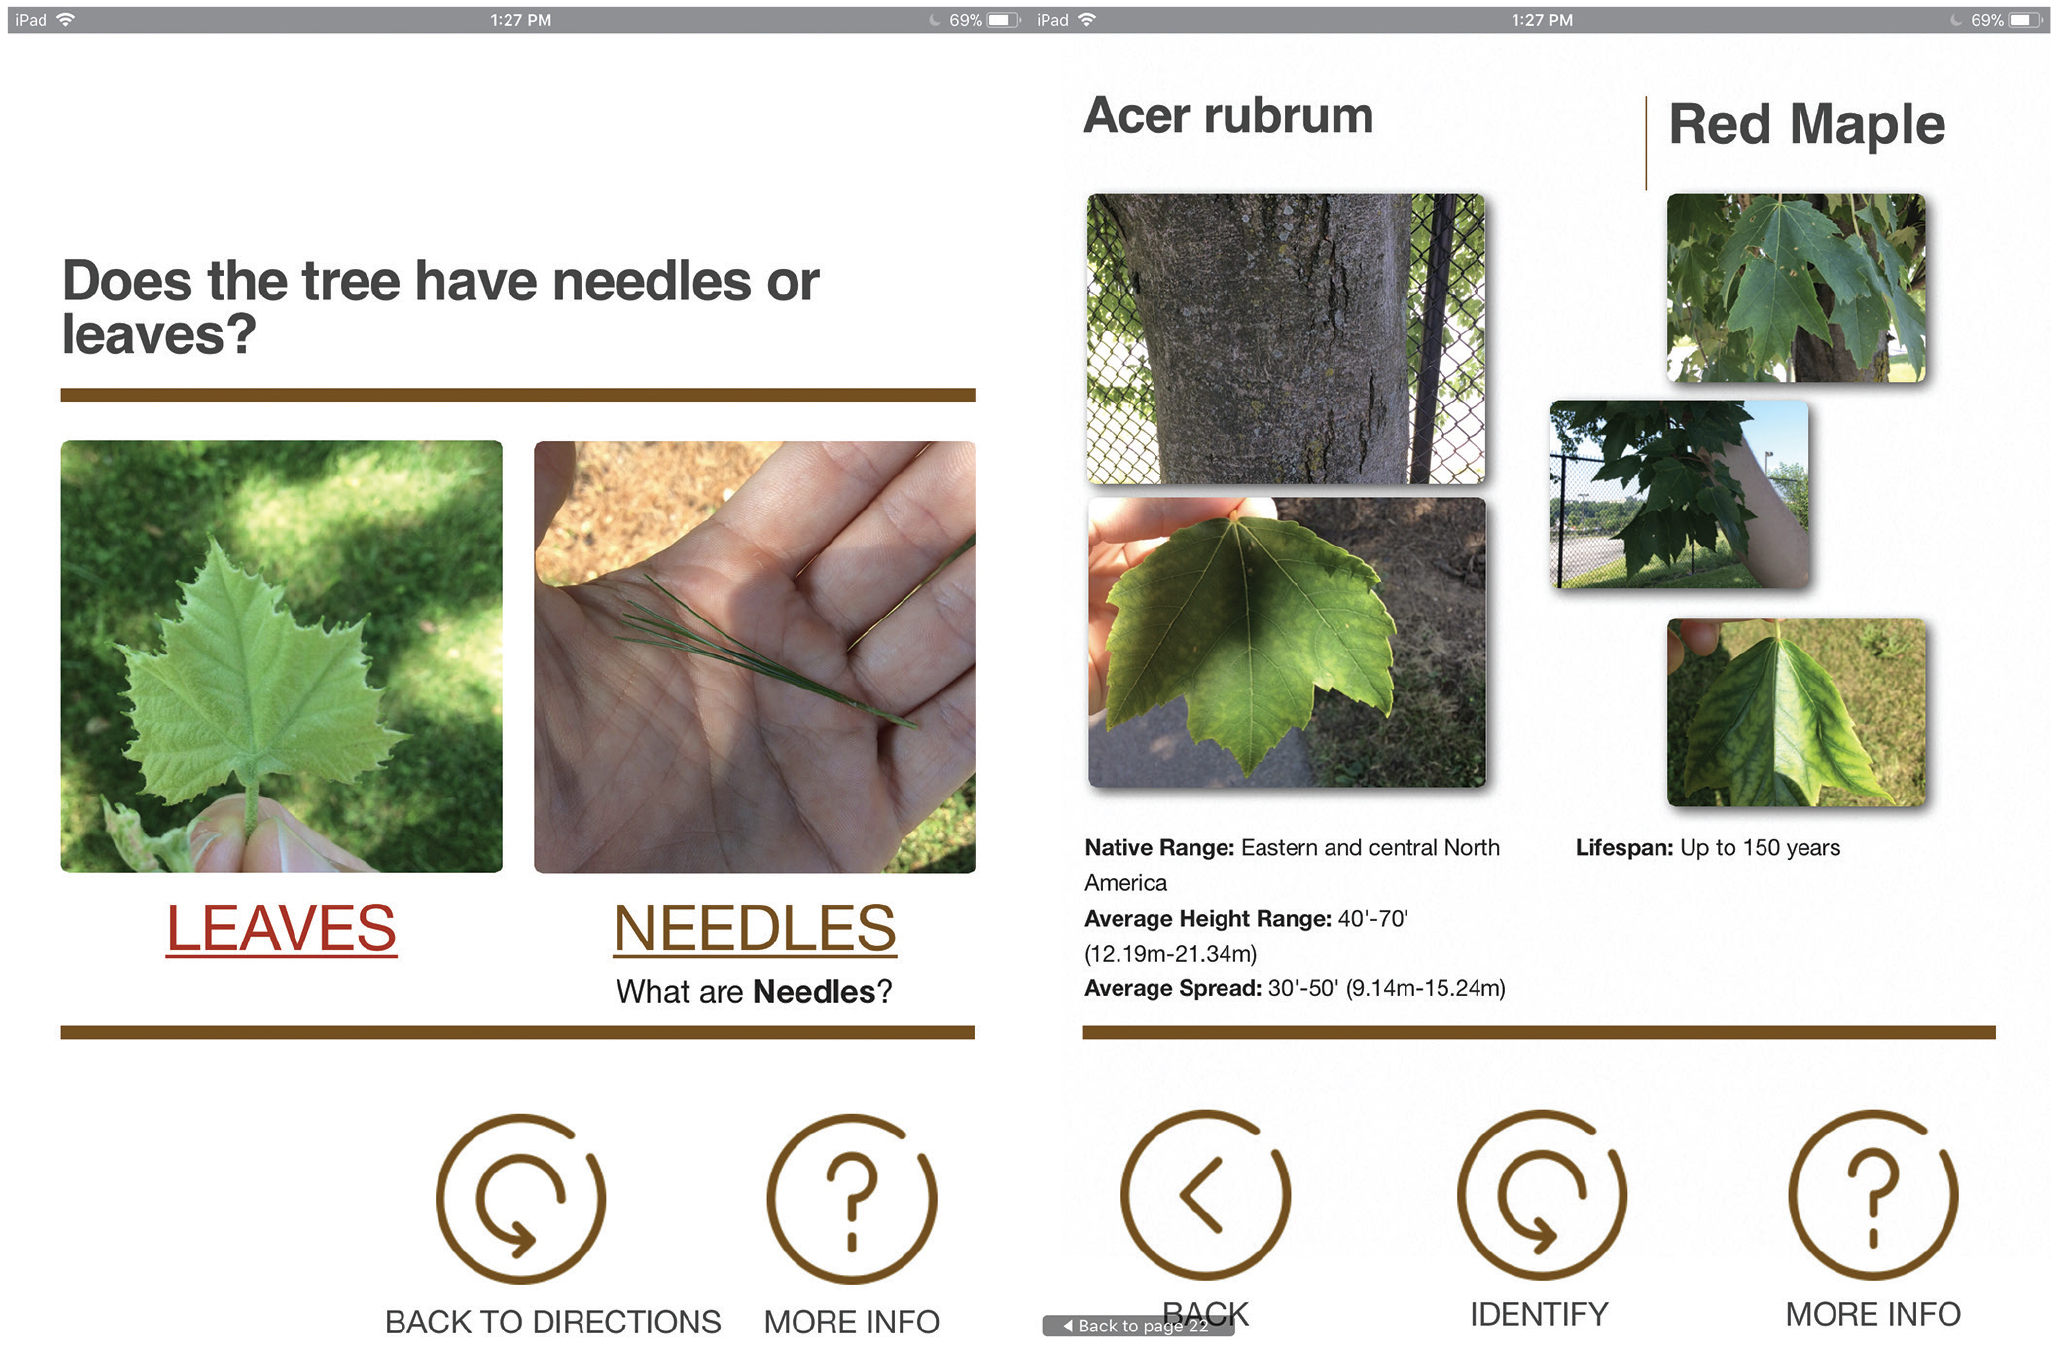 Custom tree dichotomous key for students to identify tree species during outside data collection